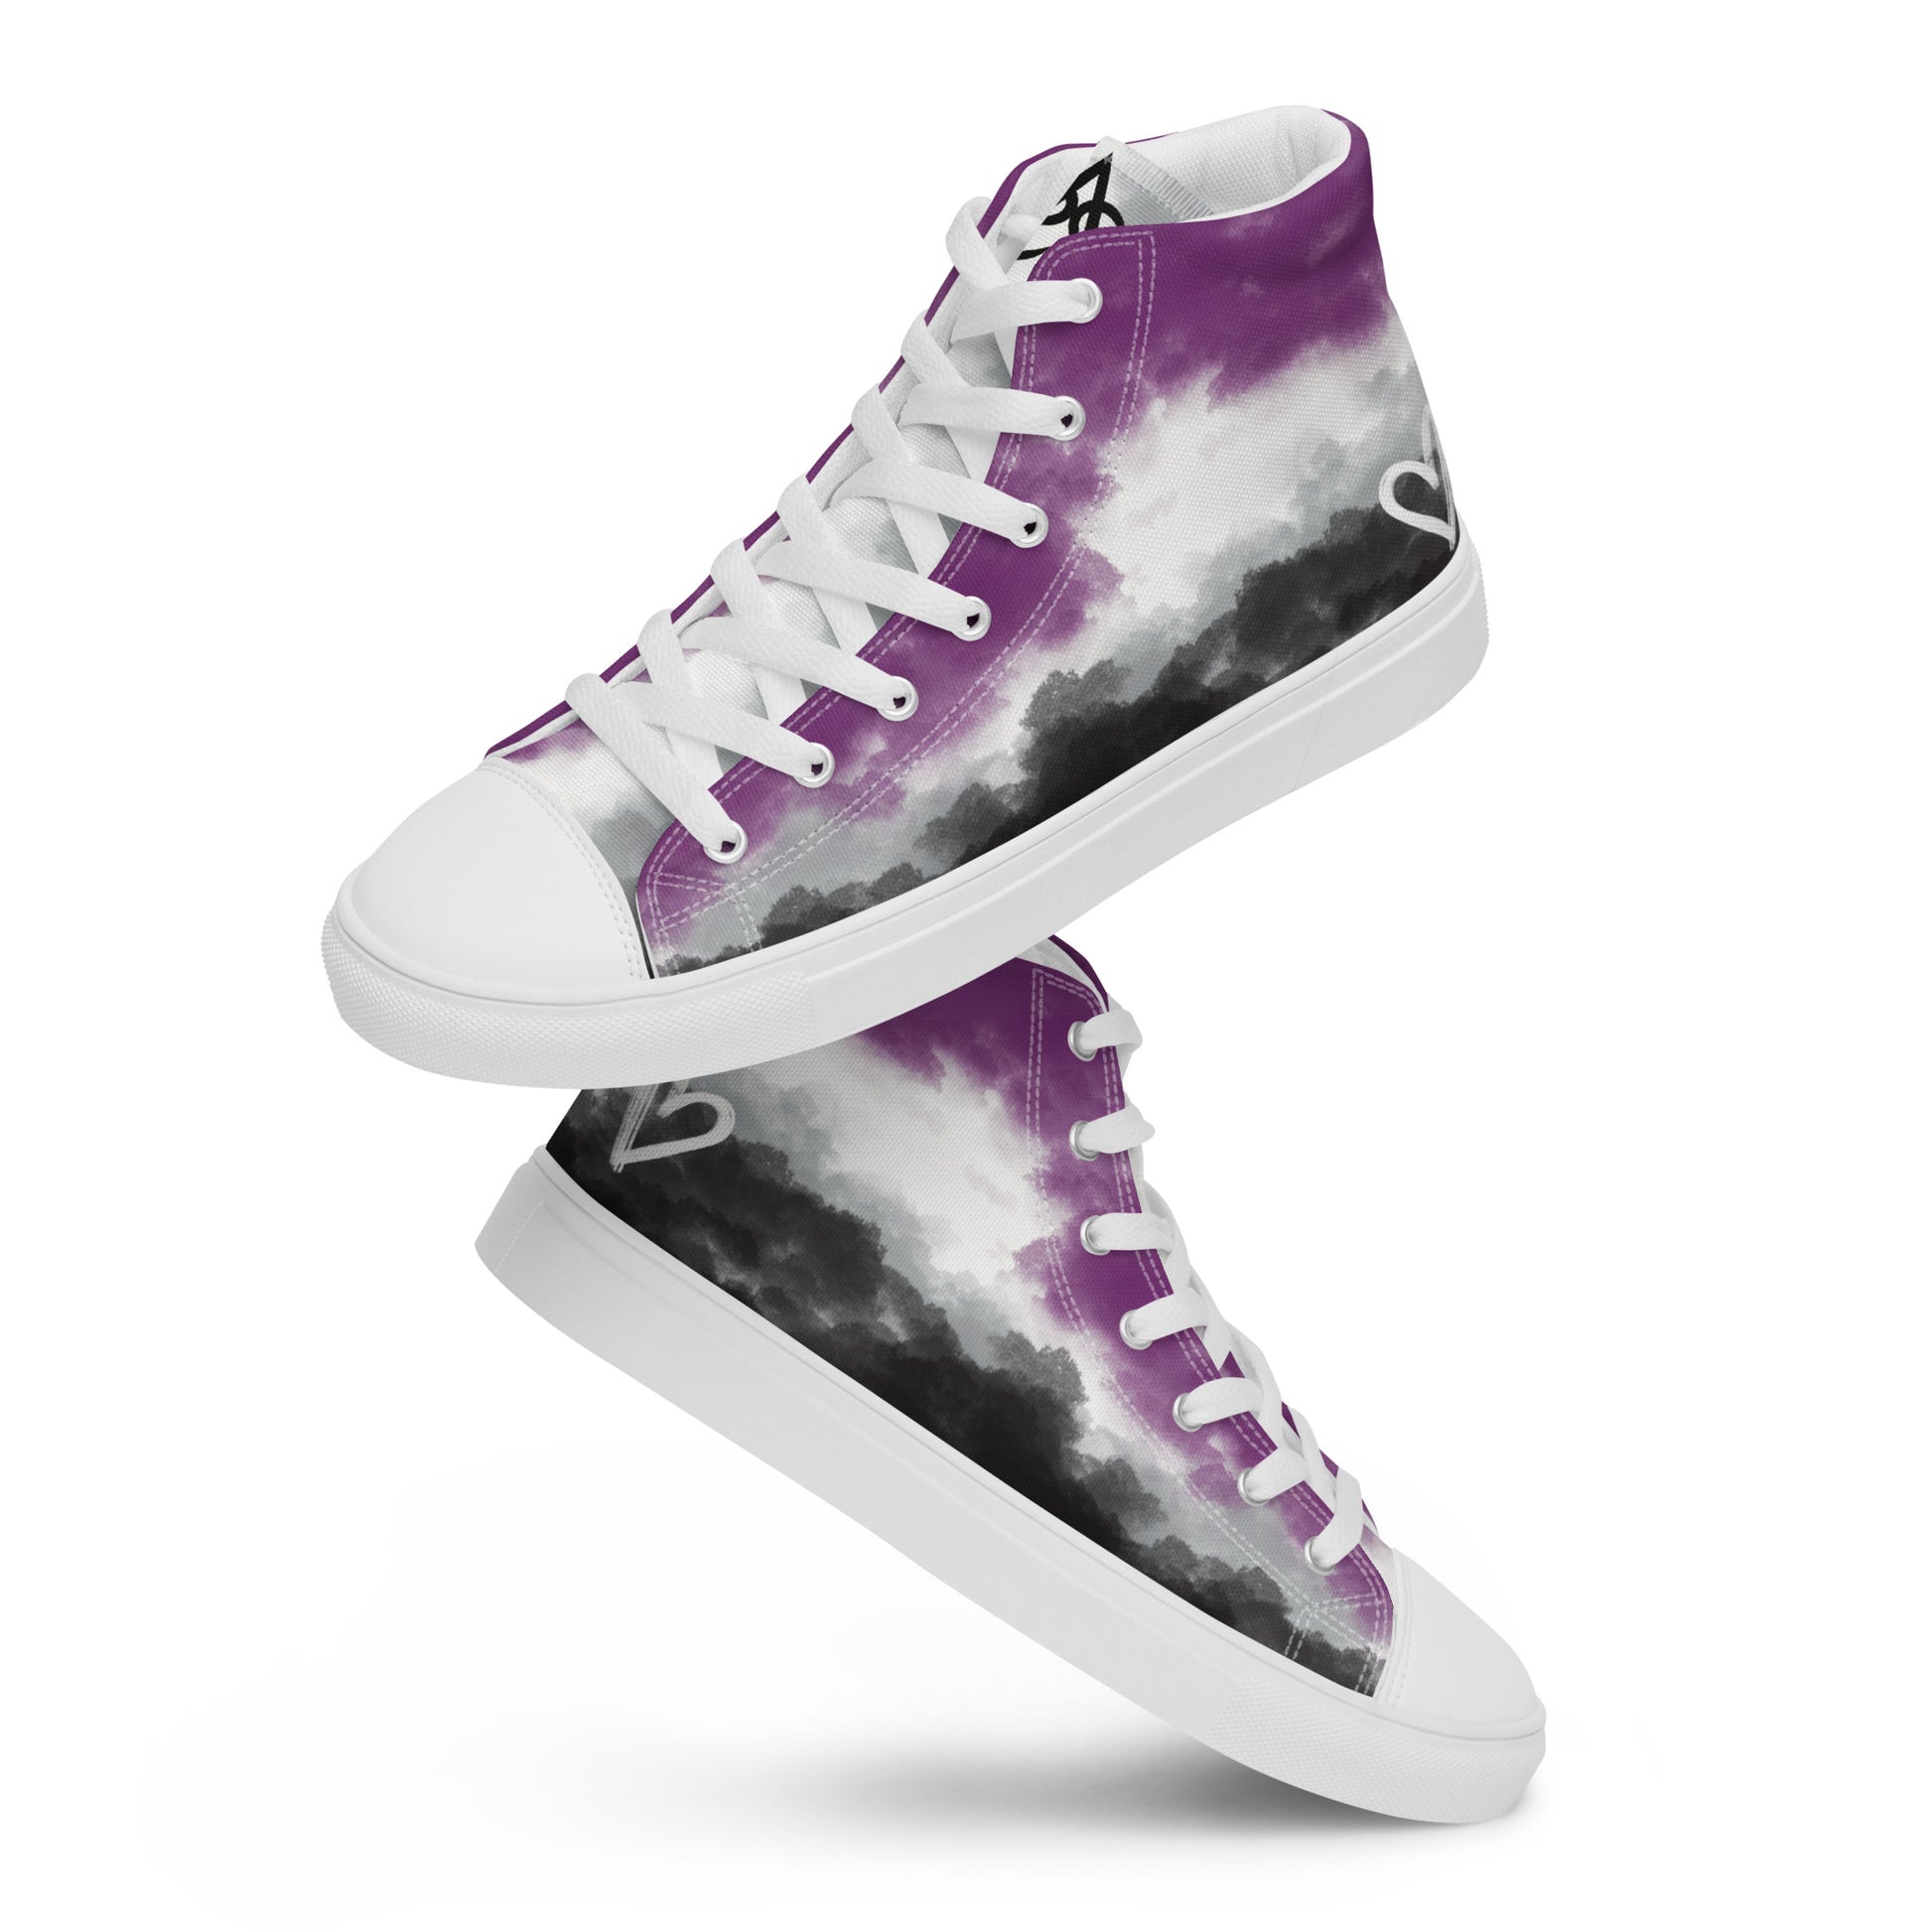 A pair of high top shoes with clouds in the asexual flag colors, a hand drawn white heart on the heel, white laces and accents, and the Aras Sivad Studio logo on the tongue, kind of floating in the air.